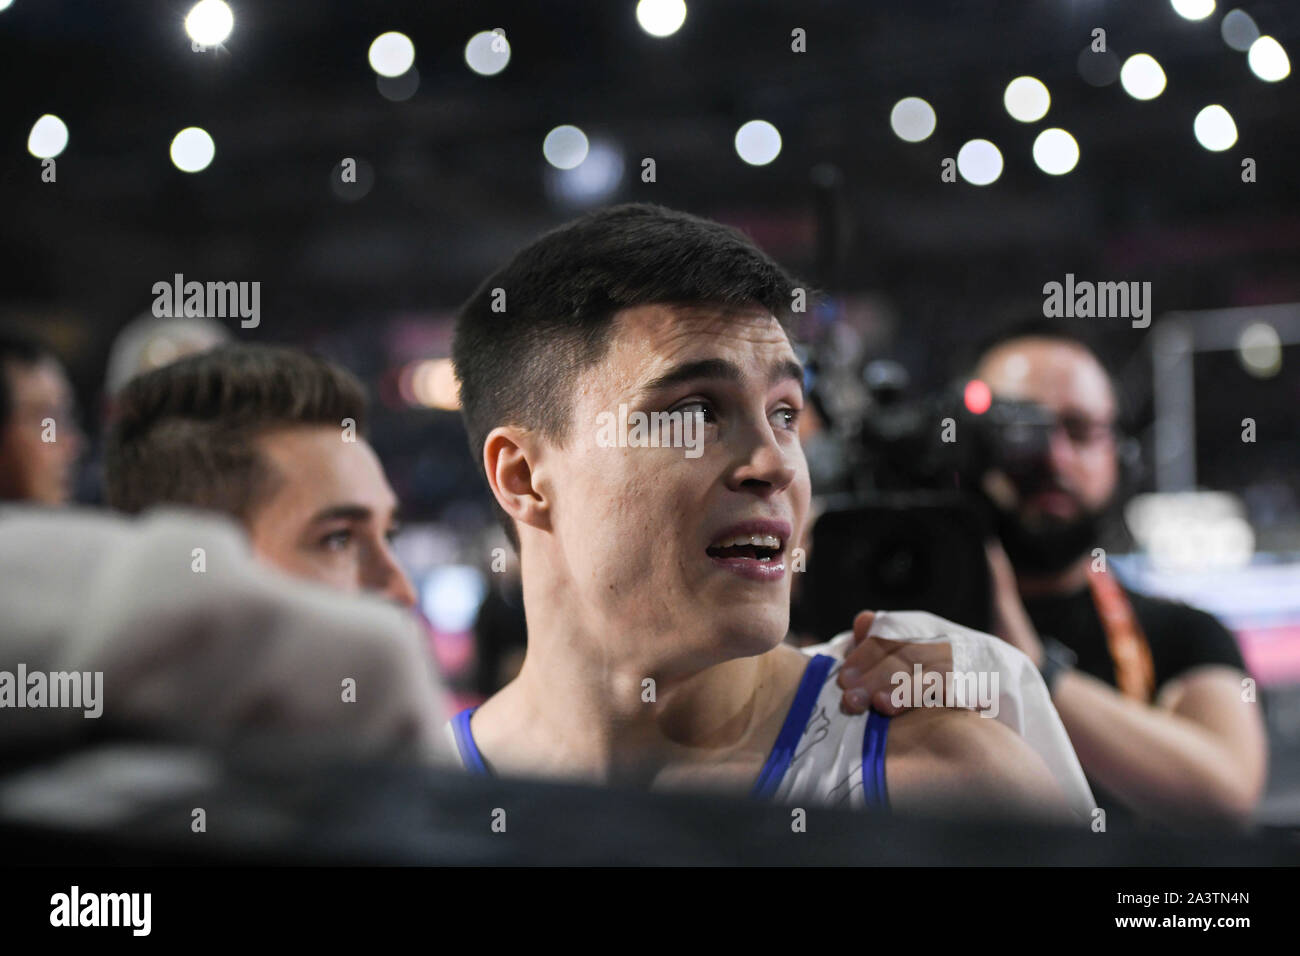 October 9, 2019: NIKITA NAGORNYY from Russia waits to see his score that will determine the winning team during the Team Final competition held in the Hanns-Martin-Schleyer-Halle in Stuttgart, Germany. Credit: Amy Sanderson/ZUMA Wire/Alamy Live News Stock Photo